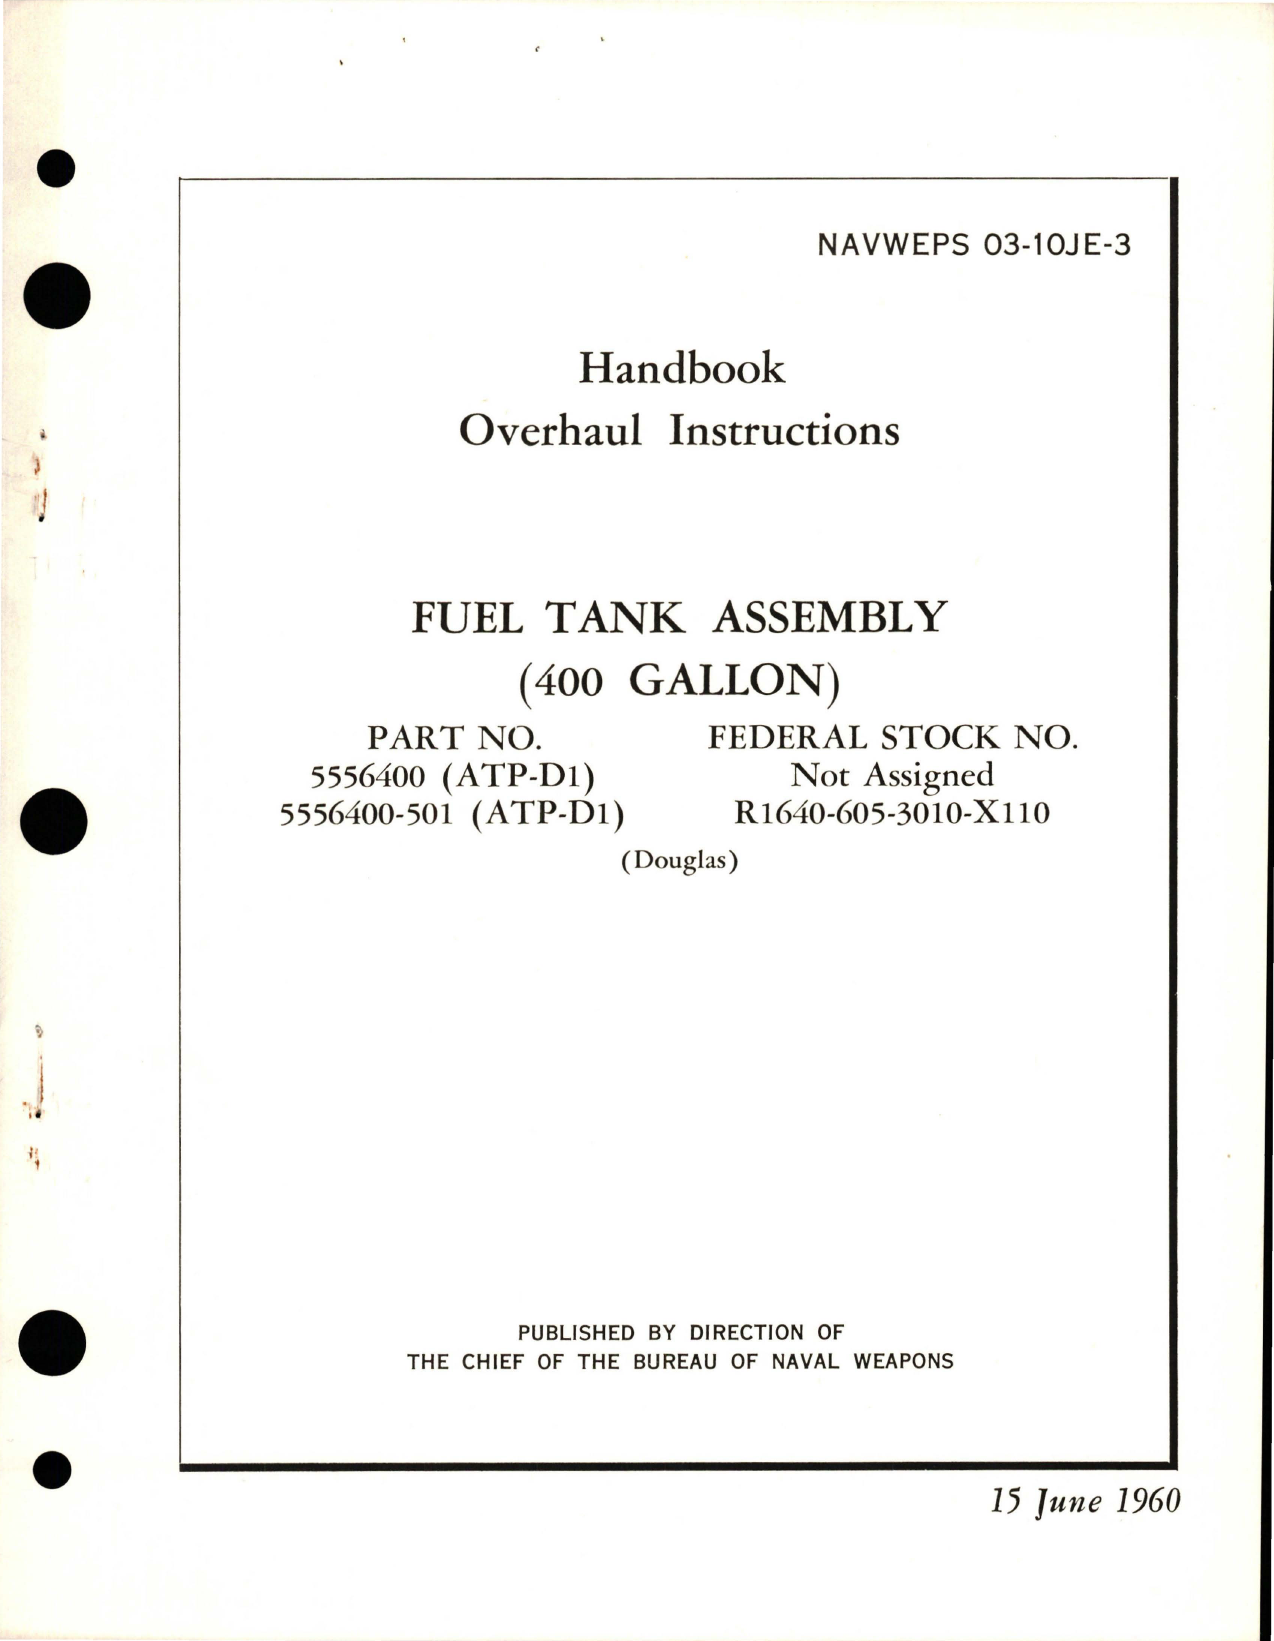 Sample page 1 from AirCorps Library document: Overhaul Instructions for Fuel Tank Assembly - 400 Gallon - Parts 5556400 and 5556400-501